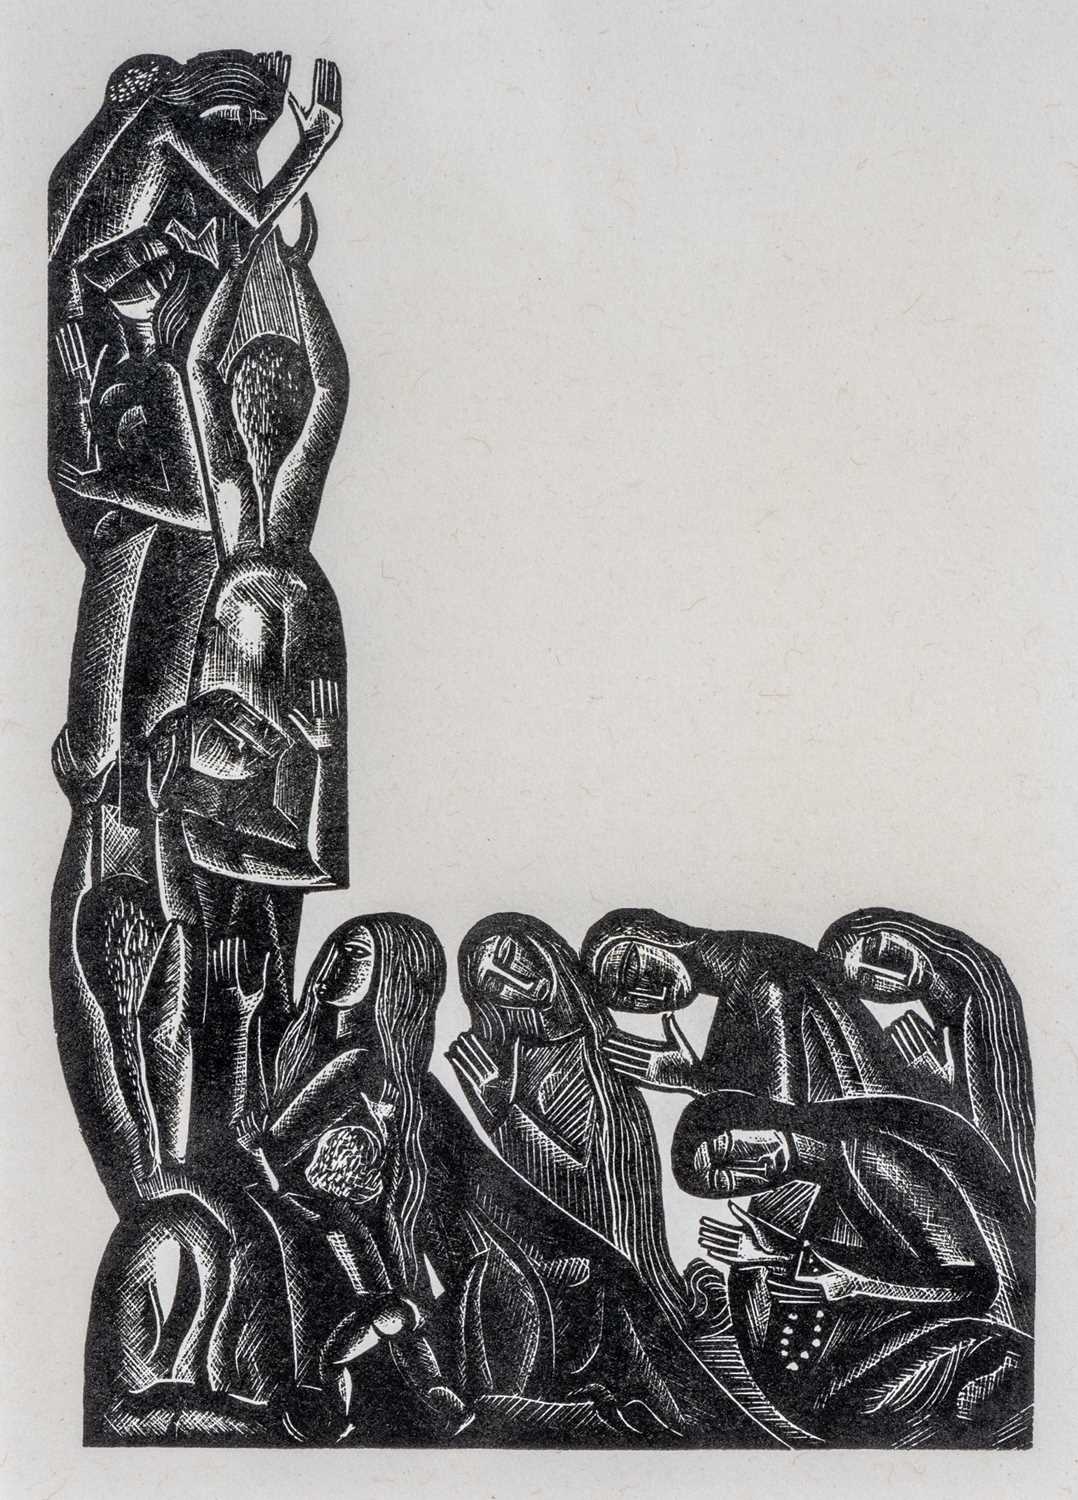 ‡ DAVID JONES 1926 limited edition (89/100) wood engraving (1979 reprint on japon paper) - entitled verso on Martin Tinney Gallery label 'The Repentant People of Nineveh (from the Book of Jonah)' by David Jones, 1926